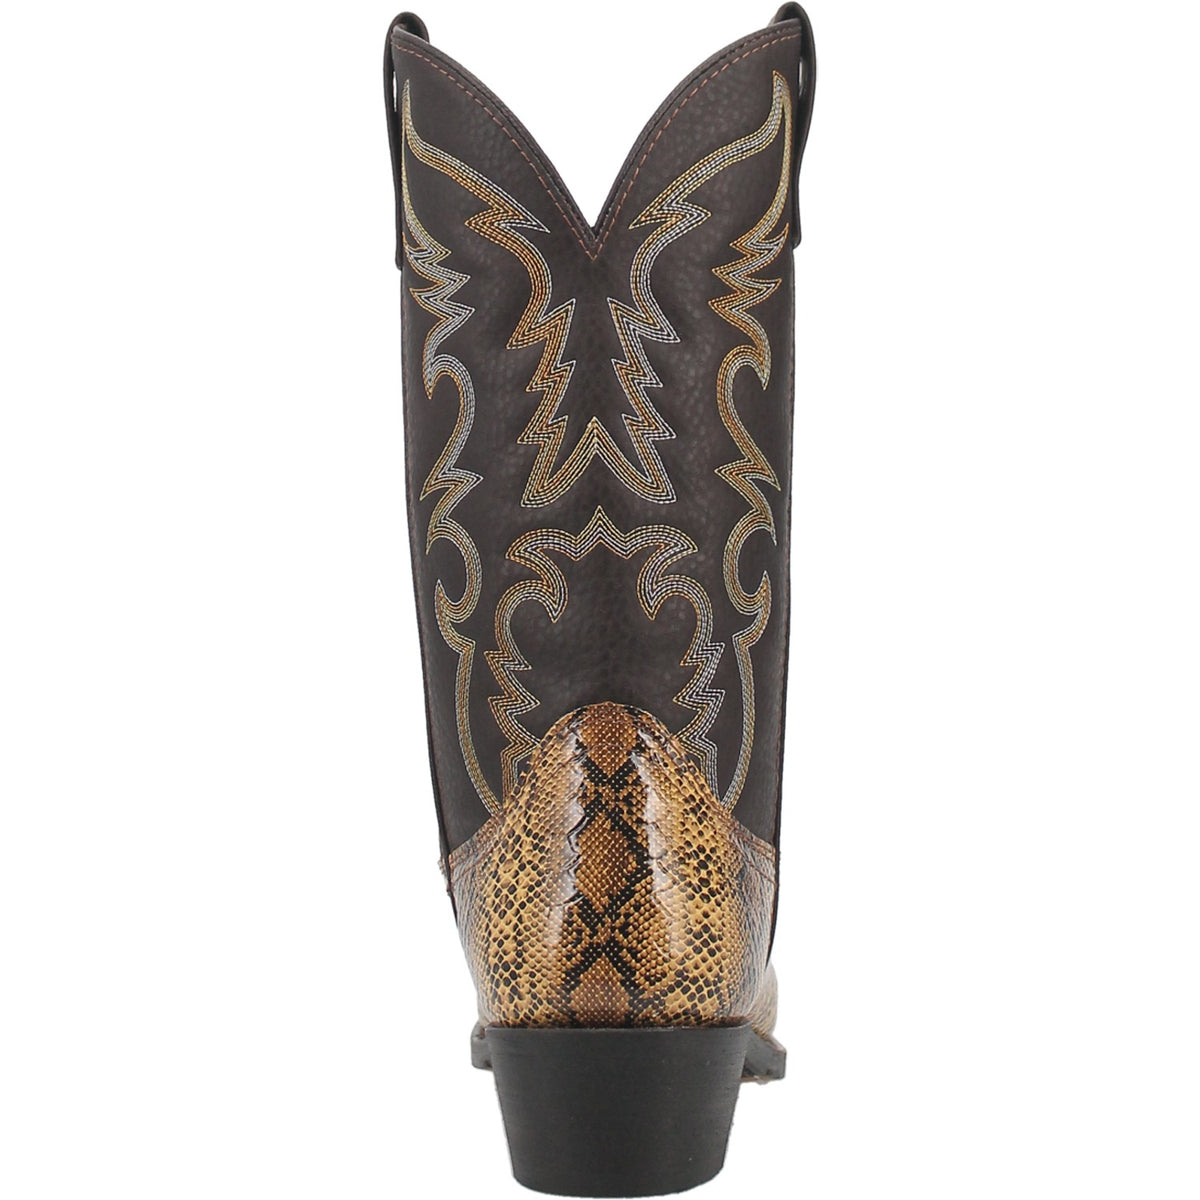 MONTY SNAKE PRINT BOOT Cover